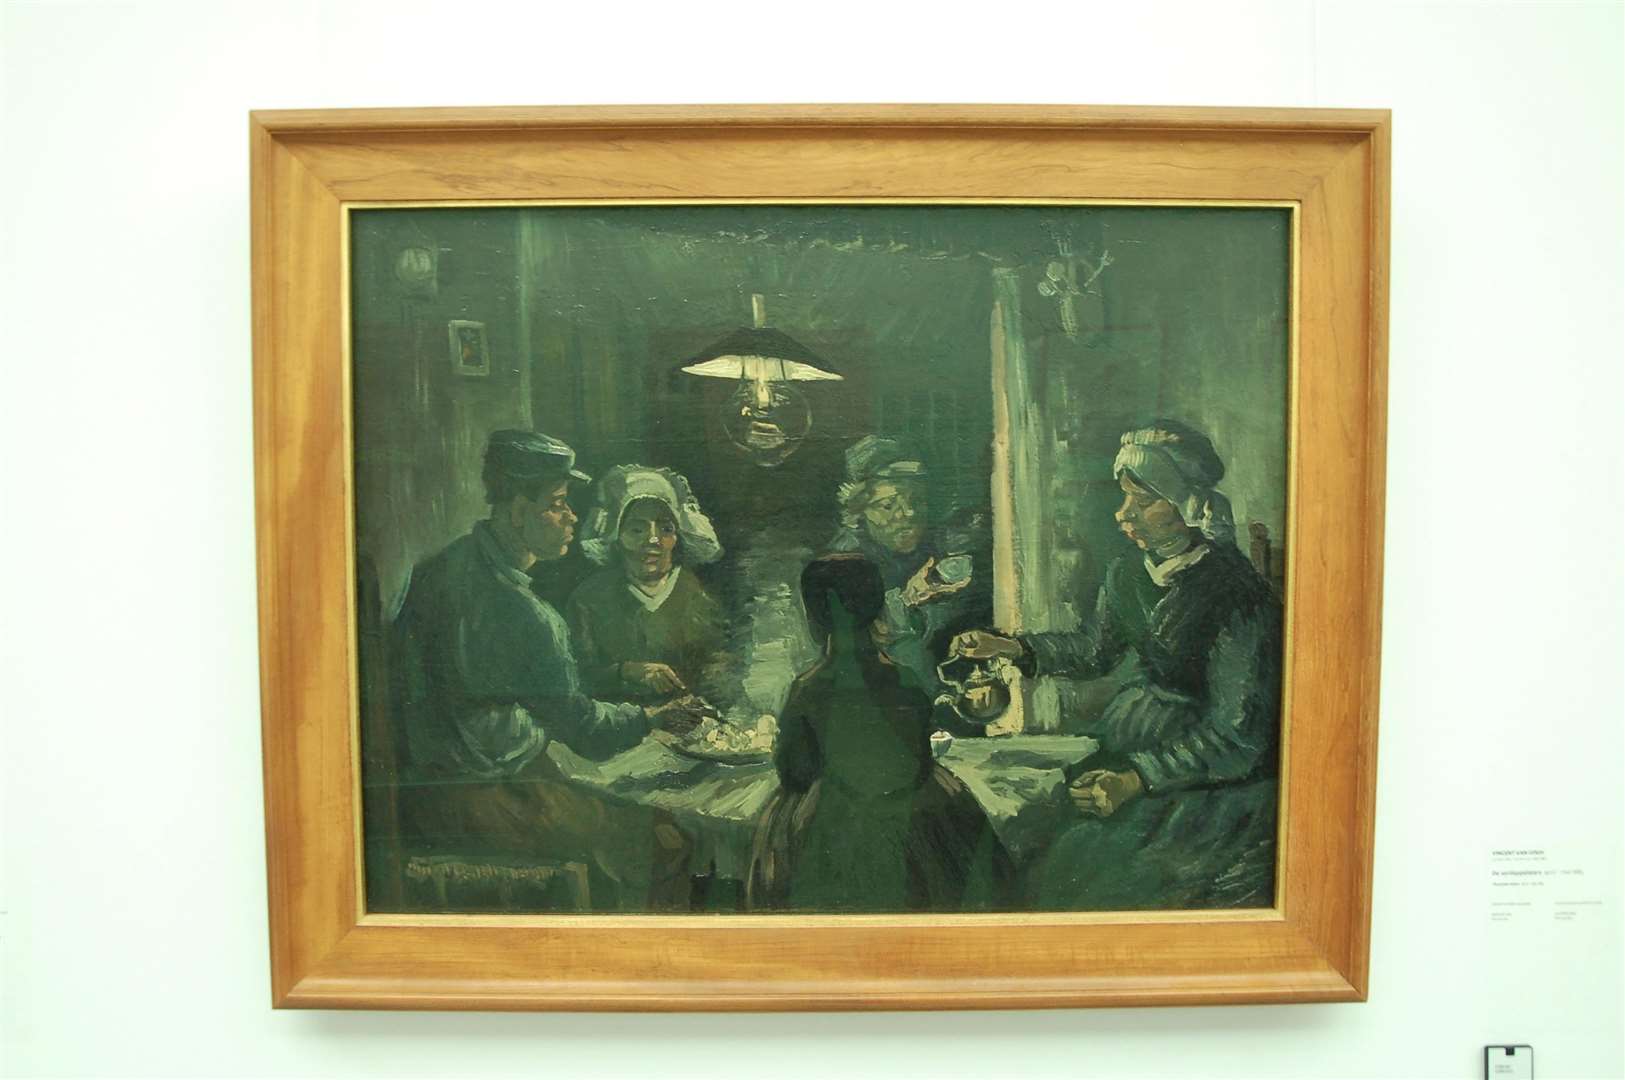 One of Van Gogh’s most significant works, “The Potato Eaters” is in the Museum, together with his preliminary sketches and portraits of each eater.